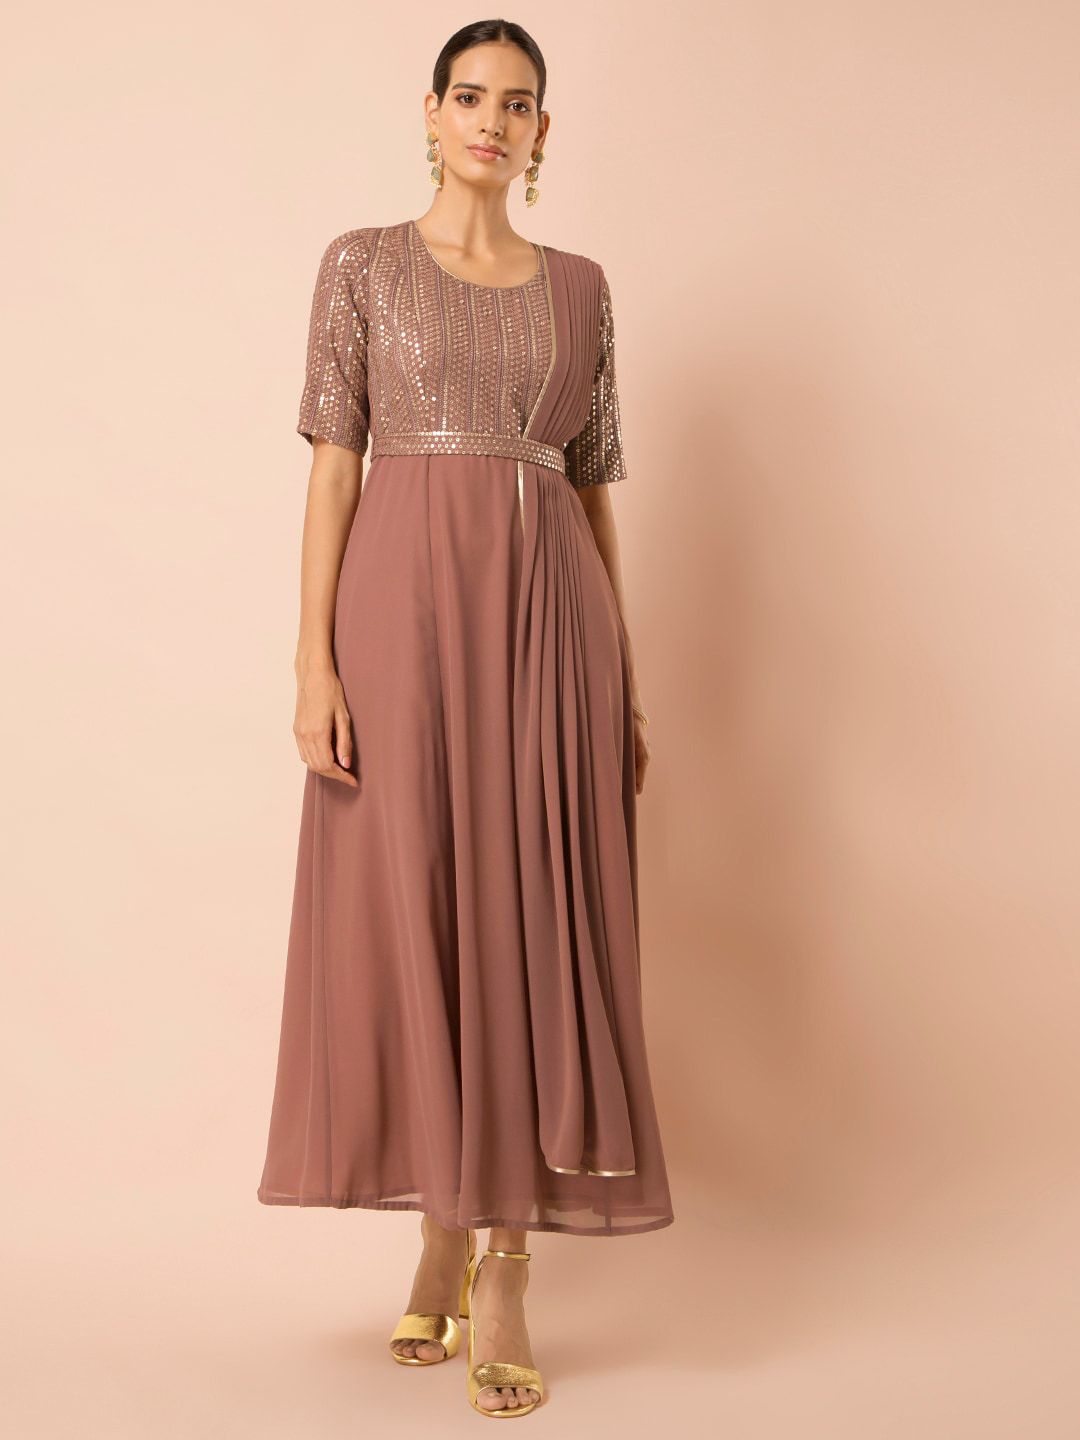 INDYA Rose Pink Embroidered Maxi Tunic with Attached Belt Price in India